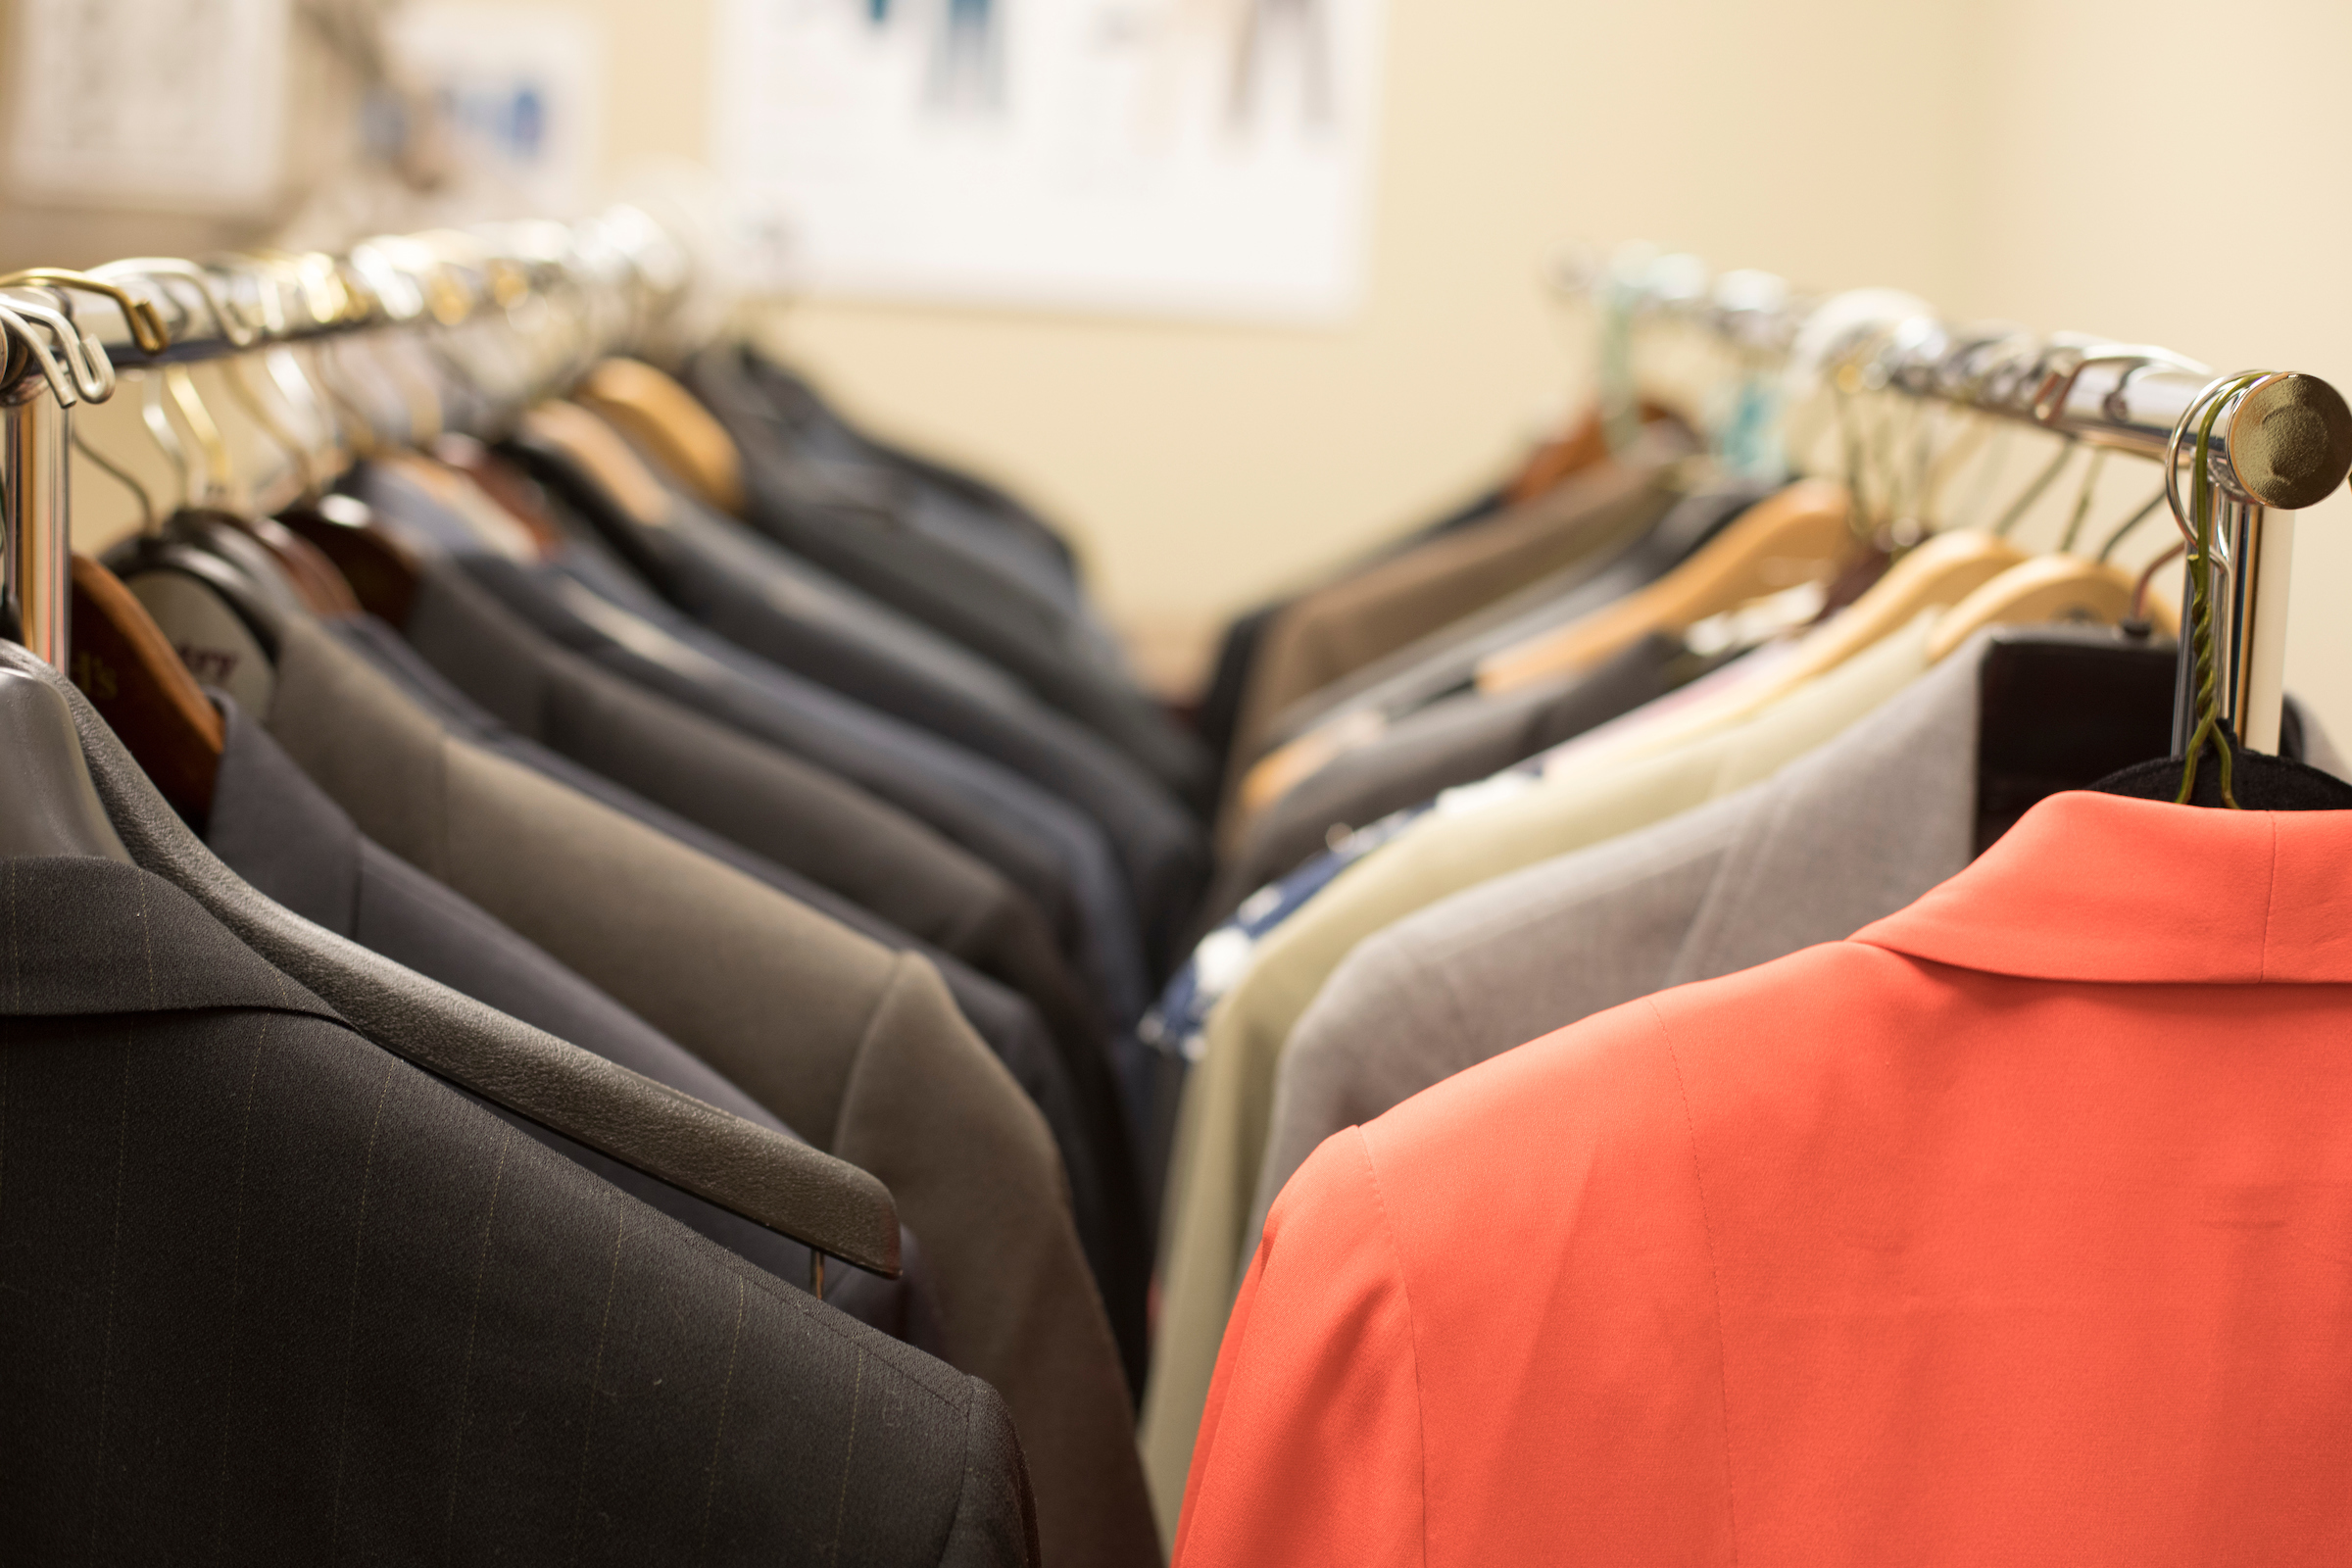 Career Closet – Career Opportunities and Employer Relations | Missouri S&T